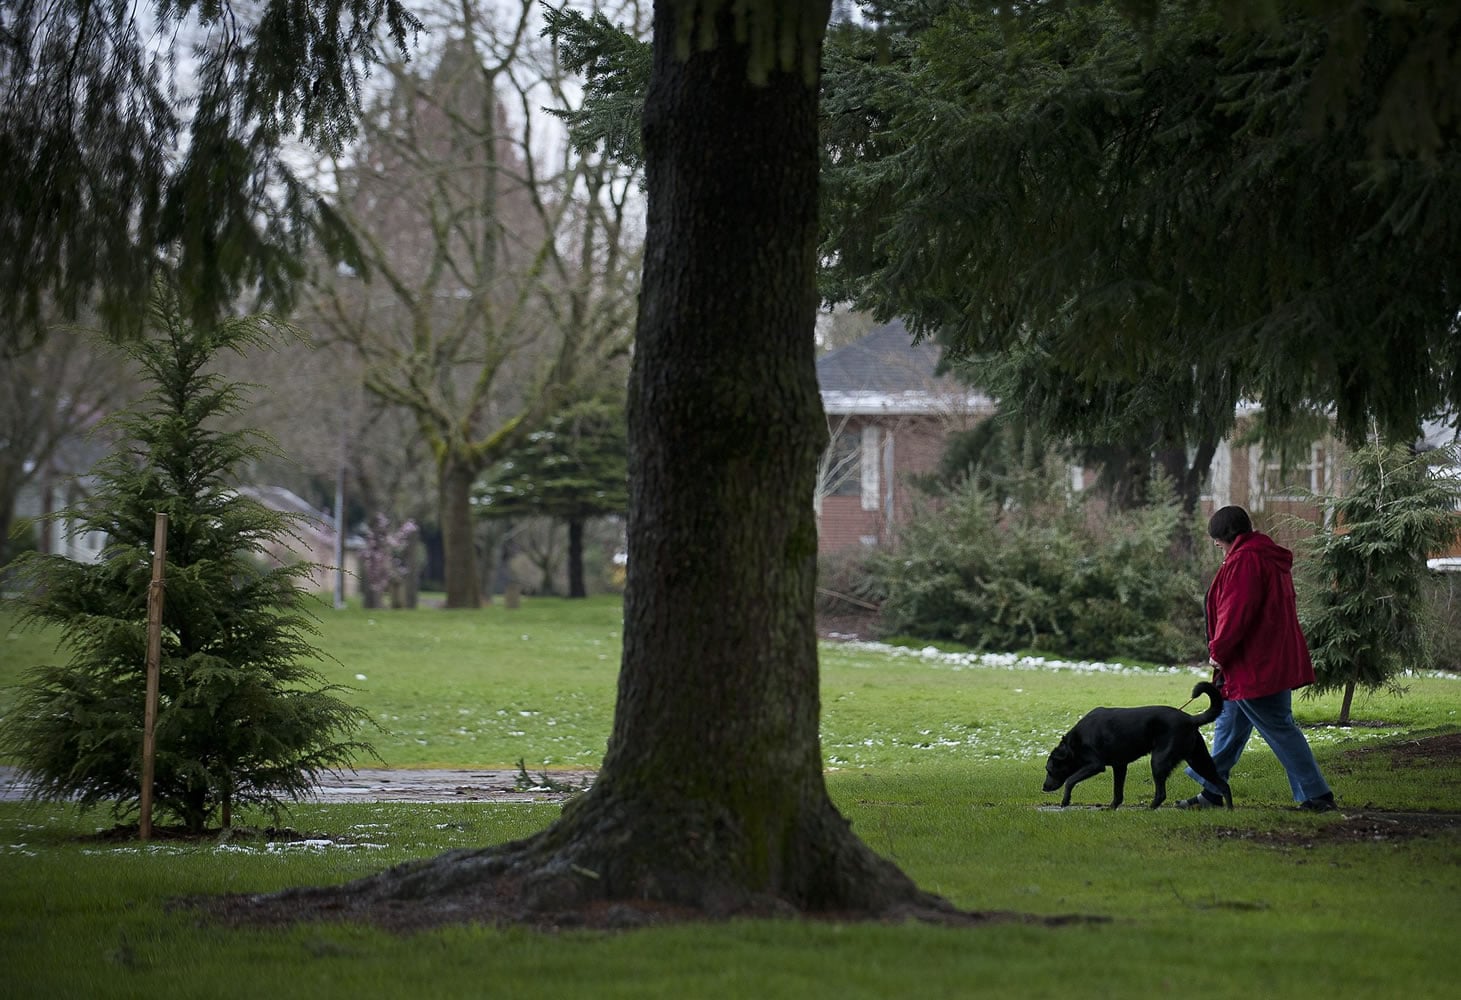 Zachary Kaufman/The Columbian
Ann Bryan walks her friend's dog, Quincy, at John Ball Park on Thursday. Bryan, who lives across the street from the park, says that she enjoys the green space, but doggie clean up bag dispensers &quot;would be nice.&quot;